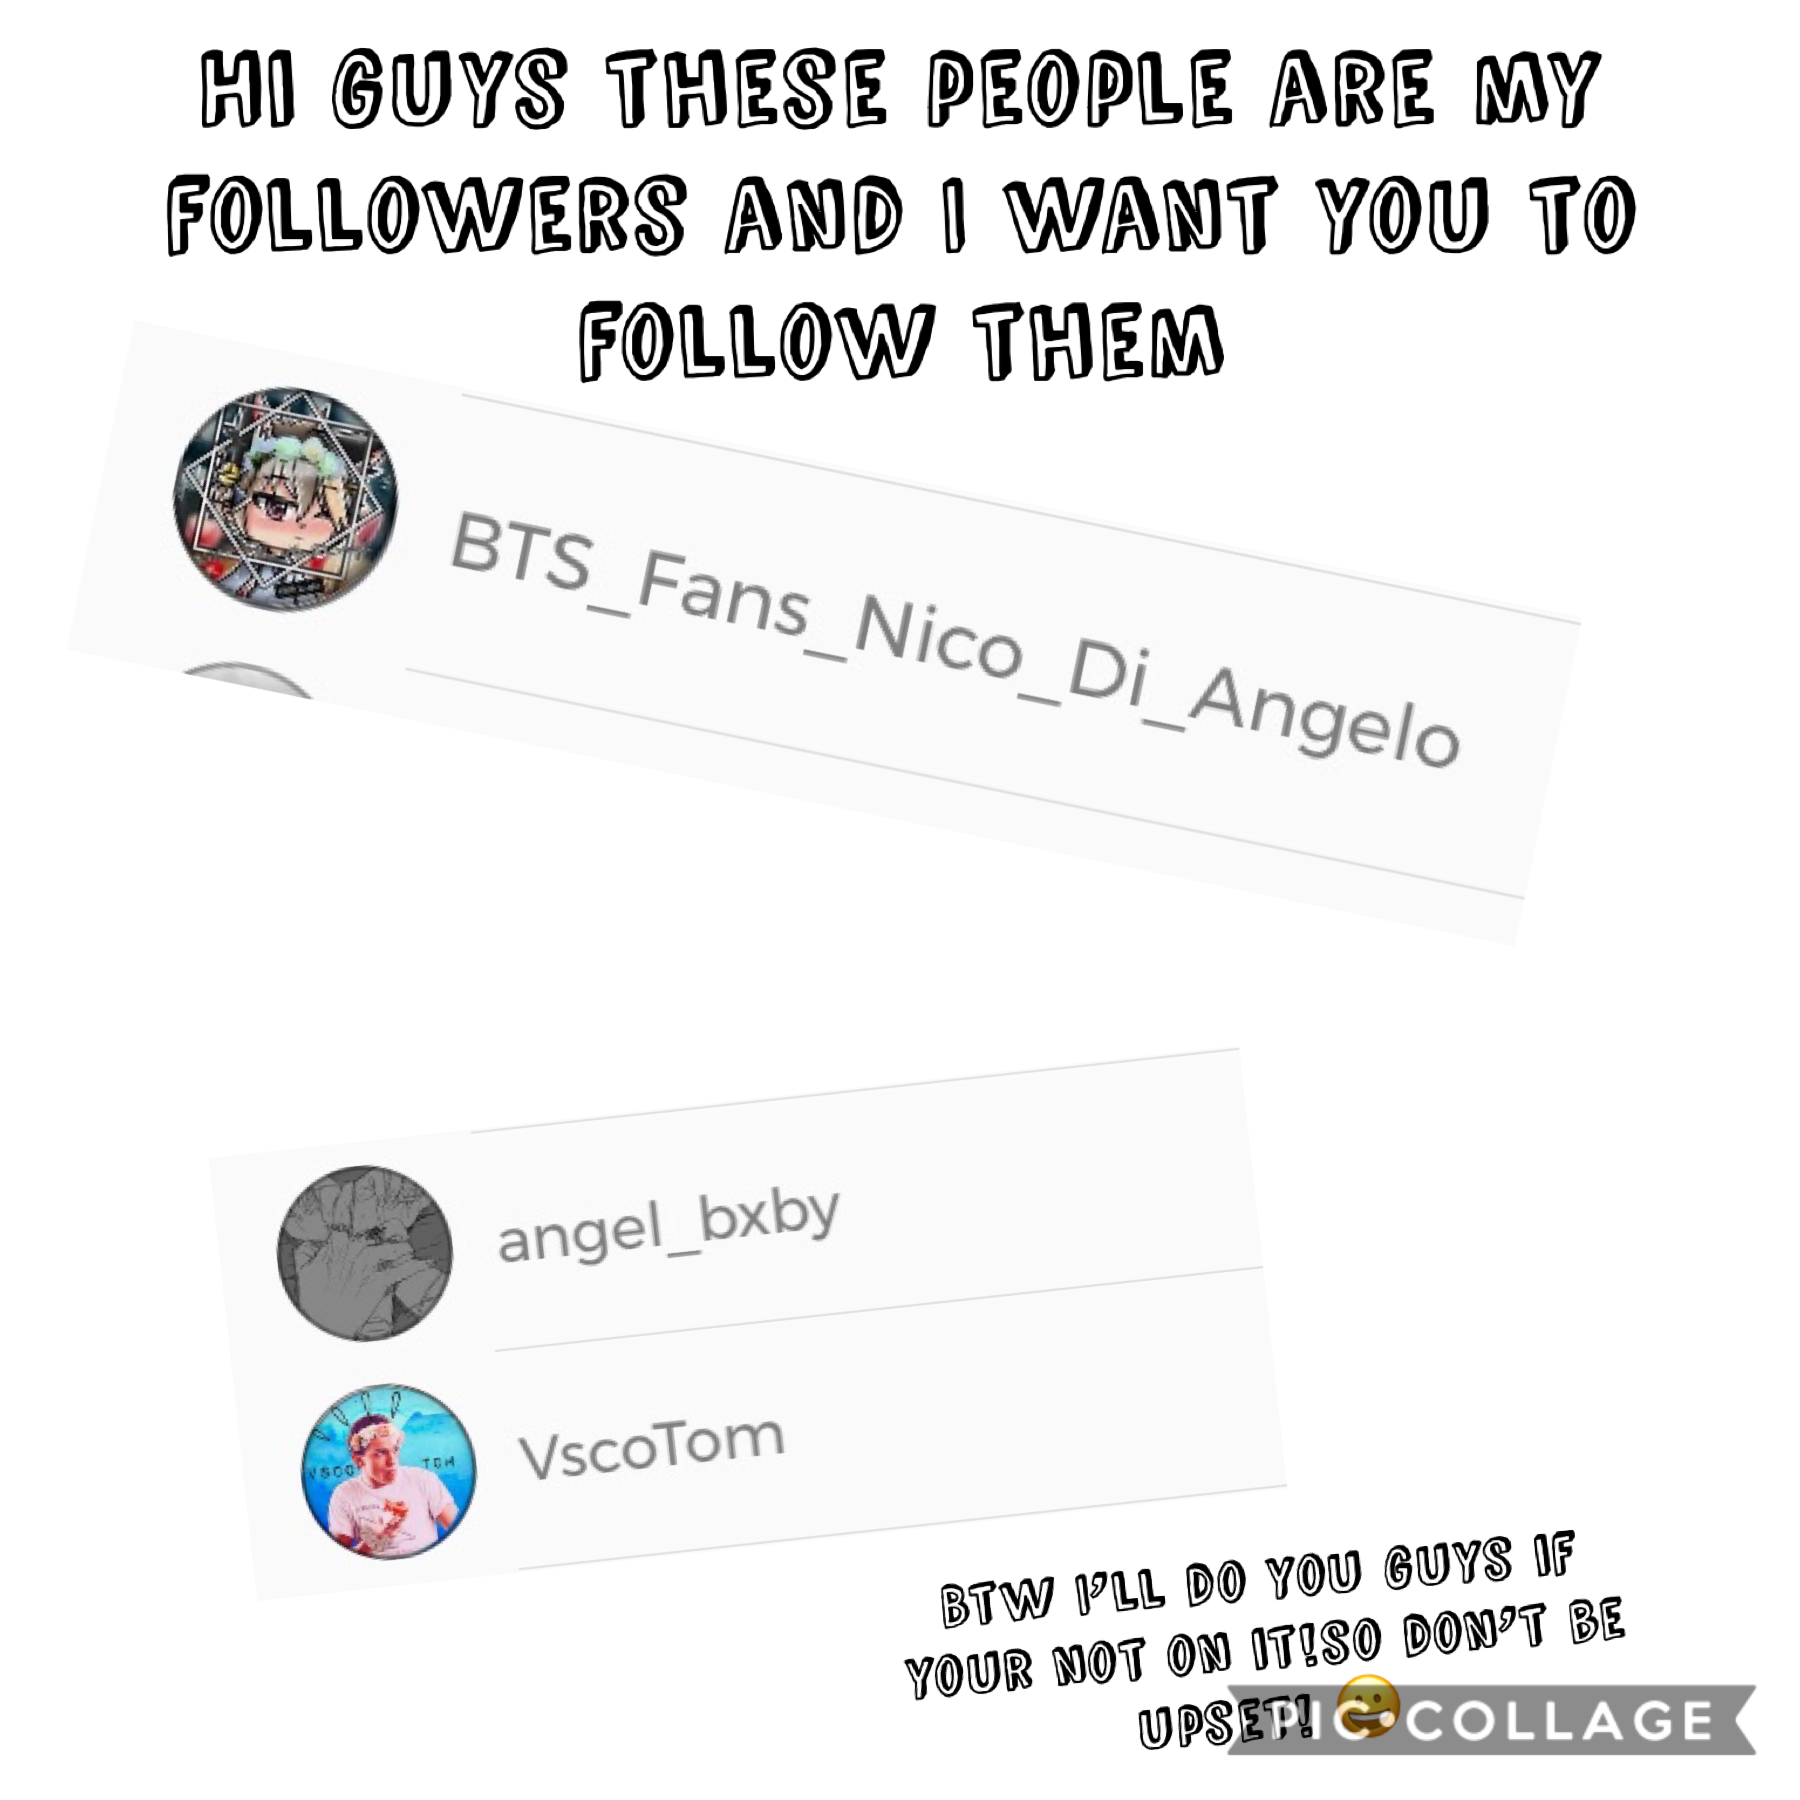 Please follow these people